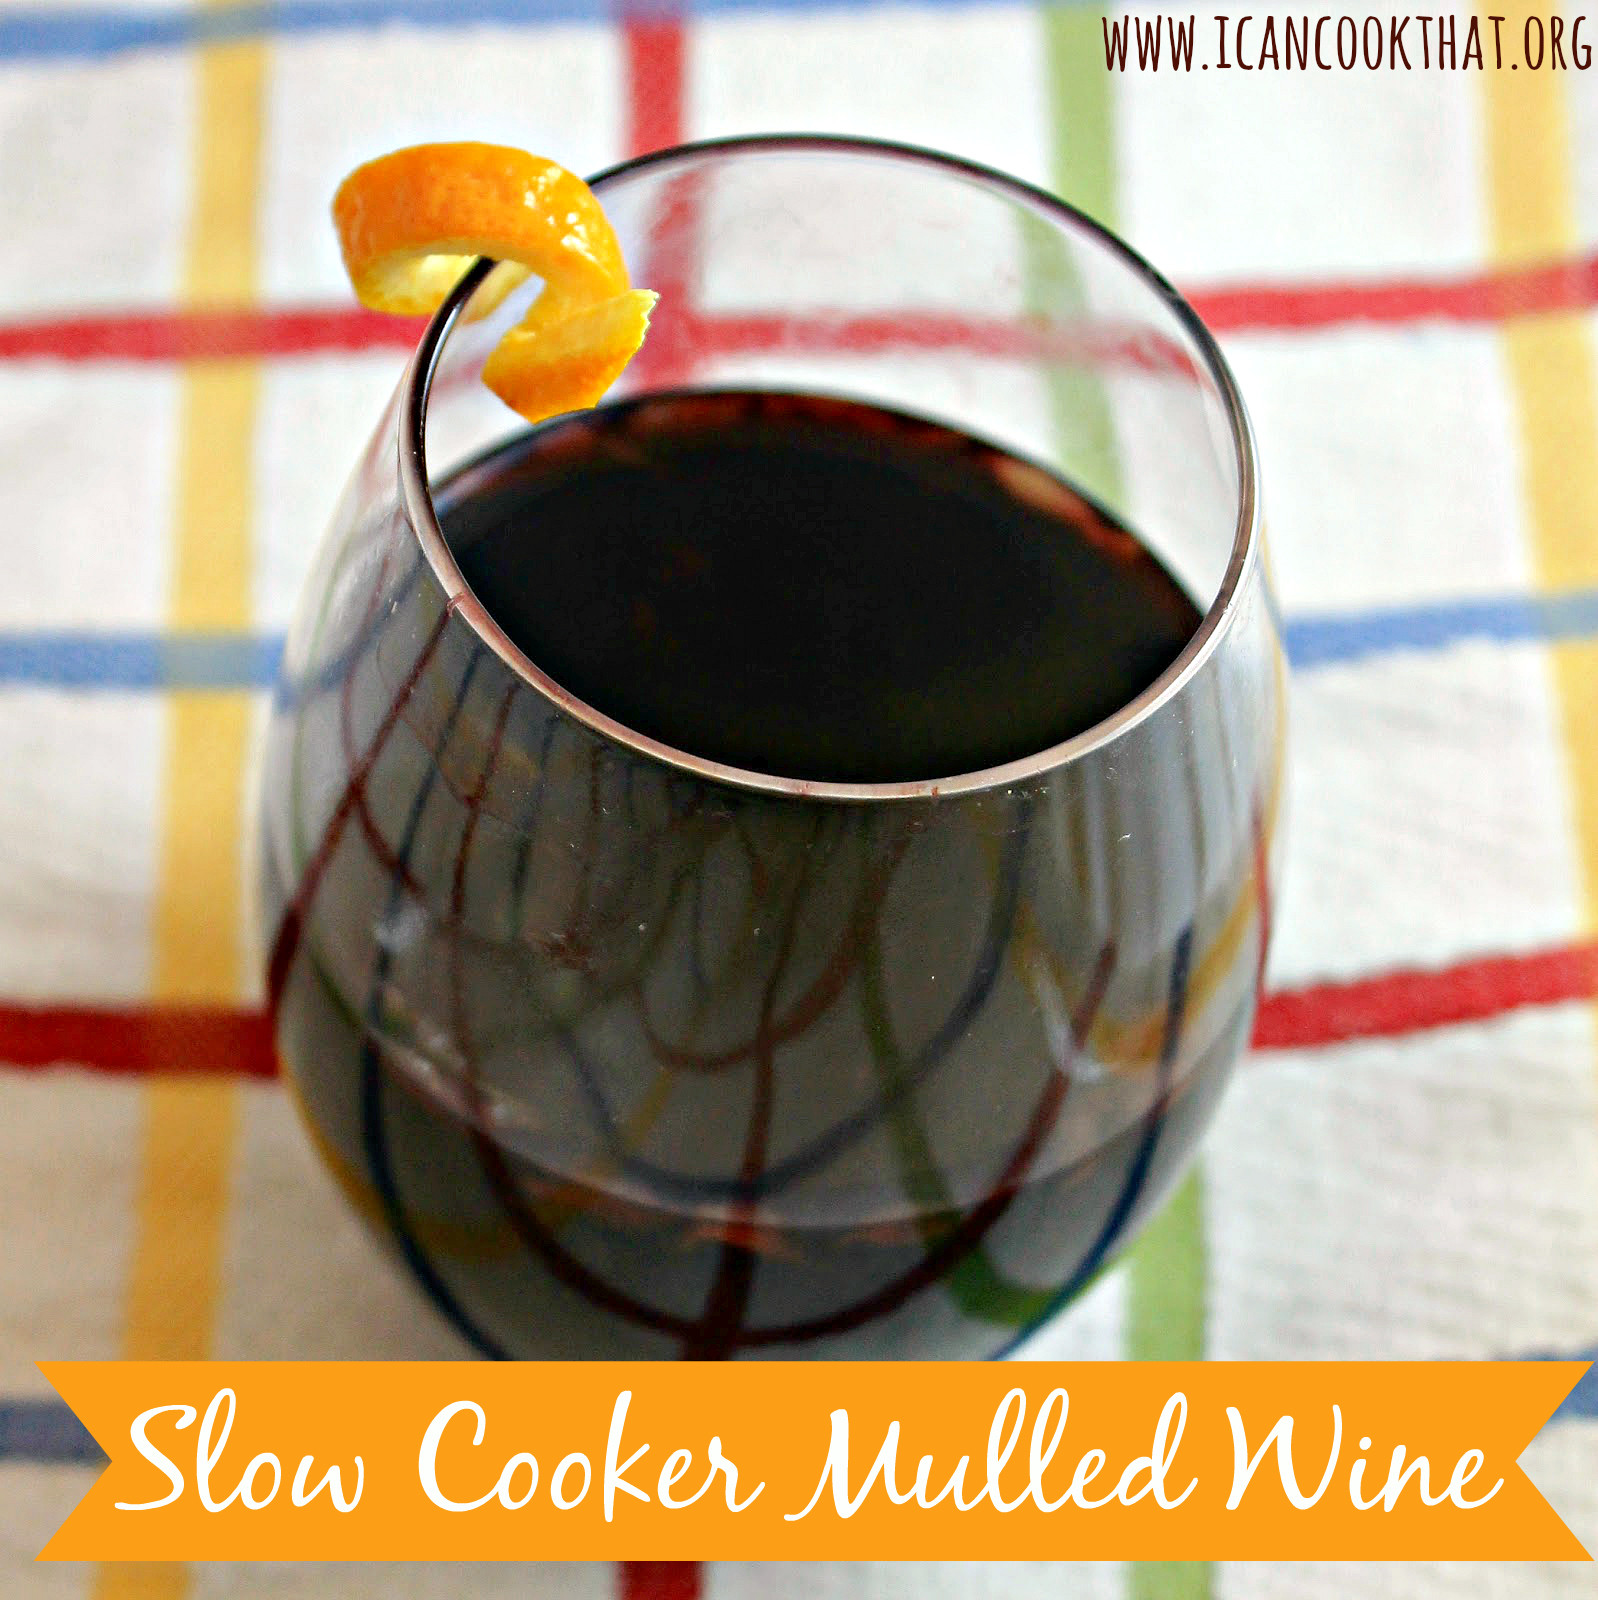 Mulled Wine Recipe Slow Cooker
 Slow Cooker Mulled Wine Recipe I Can Cook That